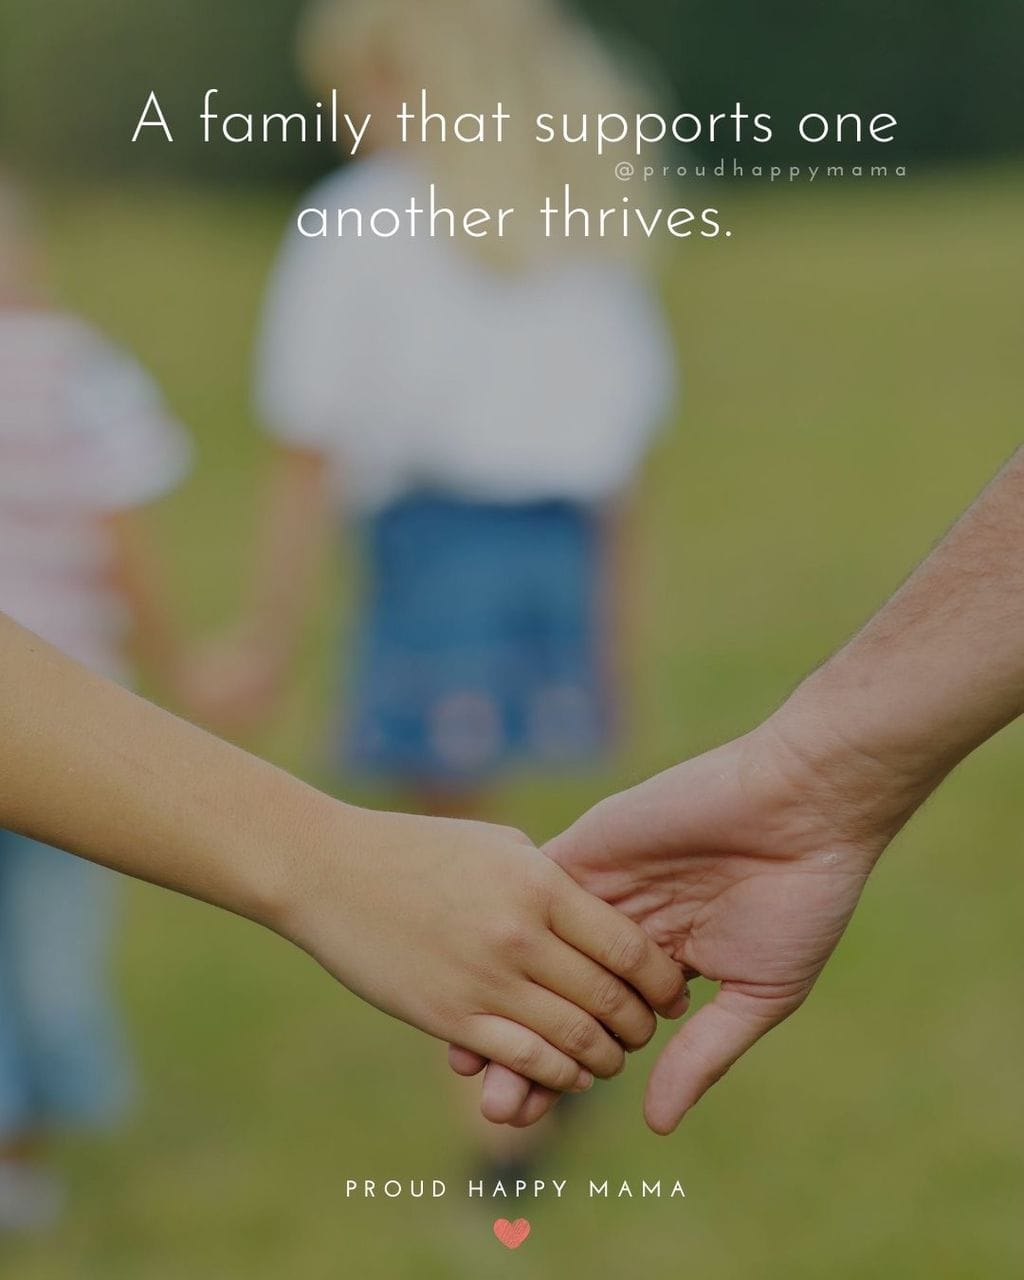 Quotes For Love Of Family | A family that supports one another thrives.